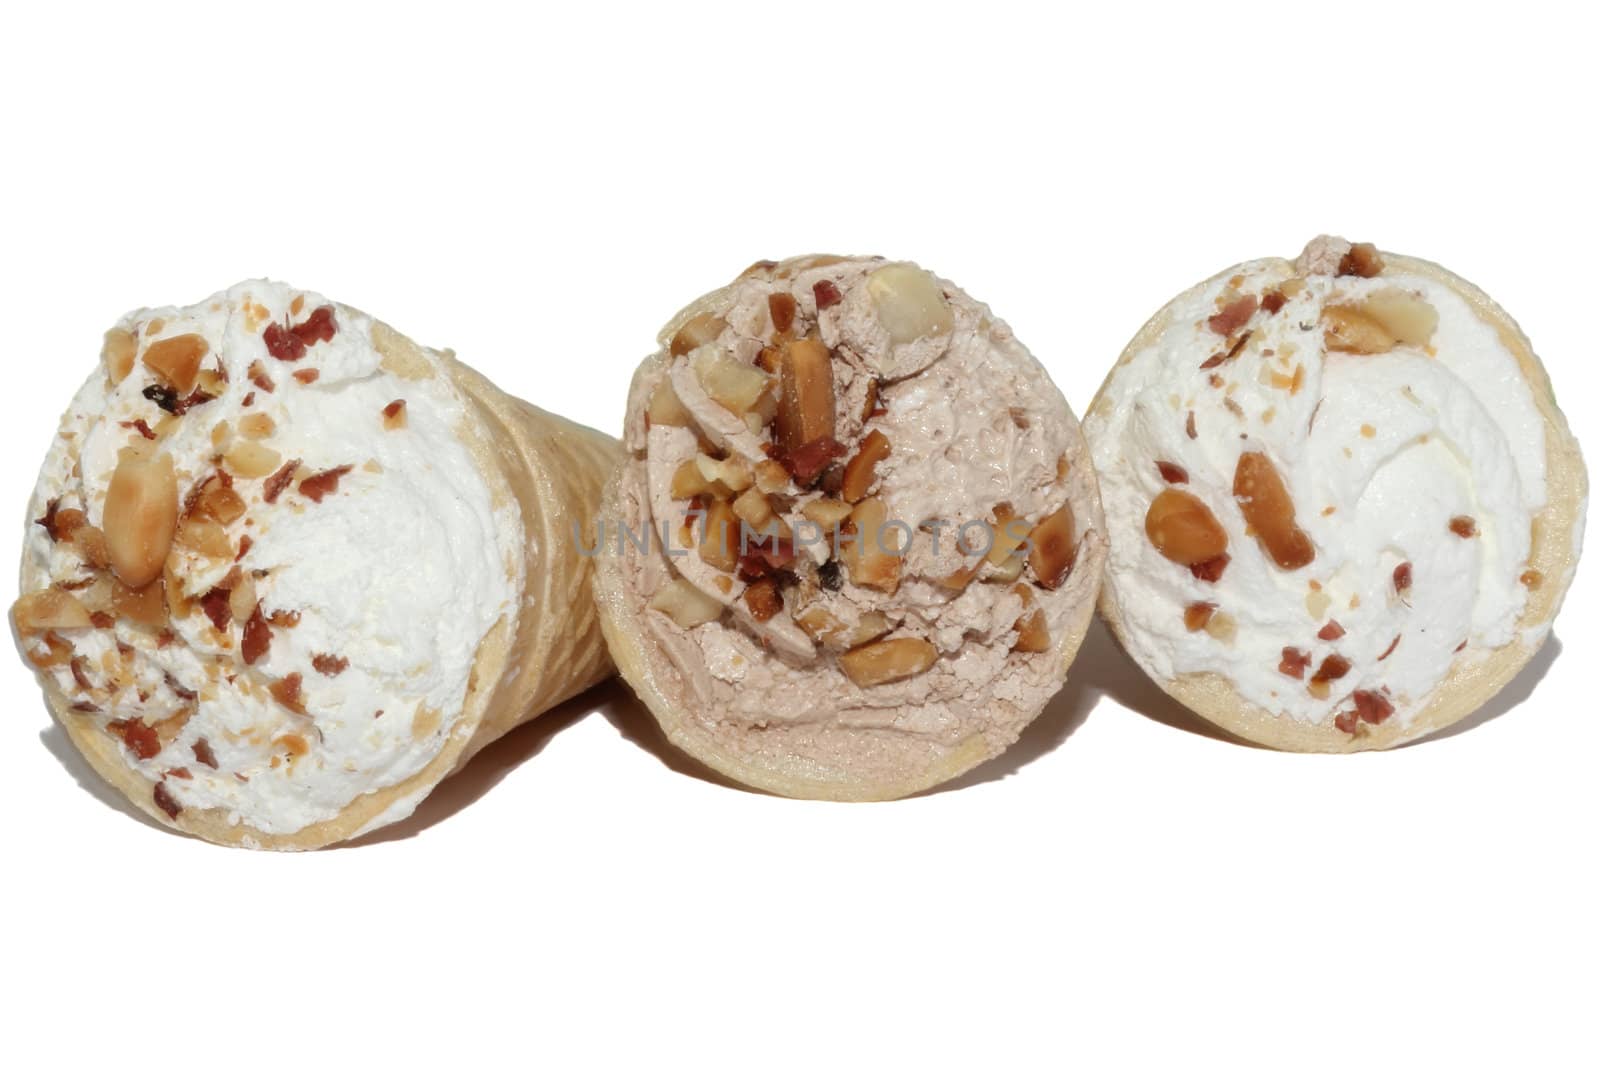 Three wafer tubules with a cream covered by nutlets on a white background